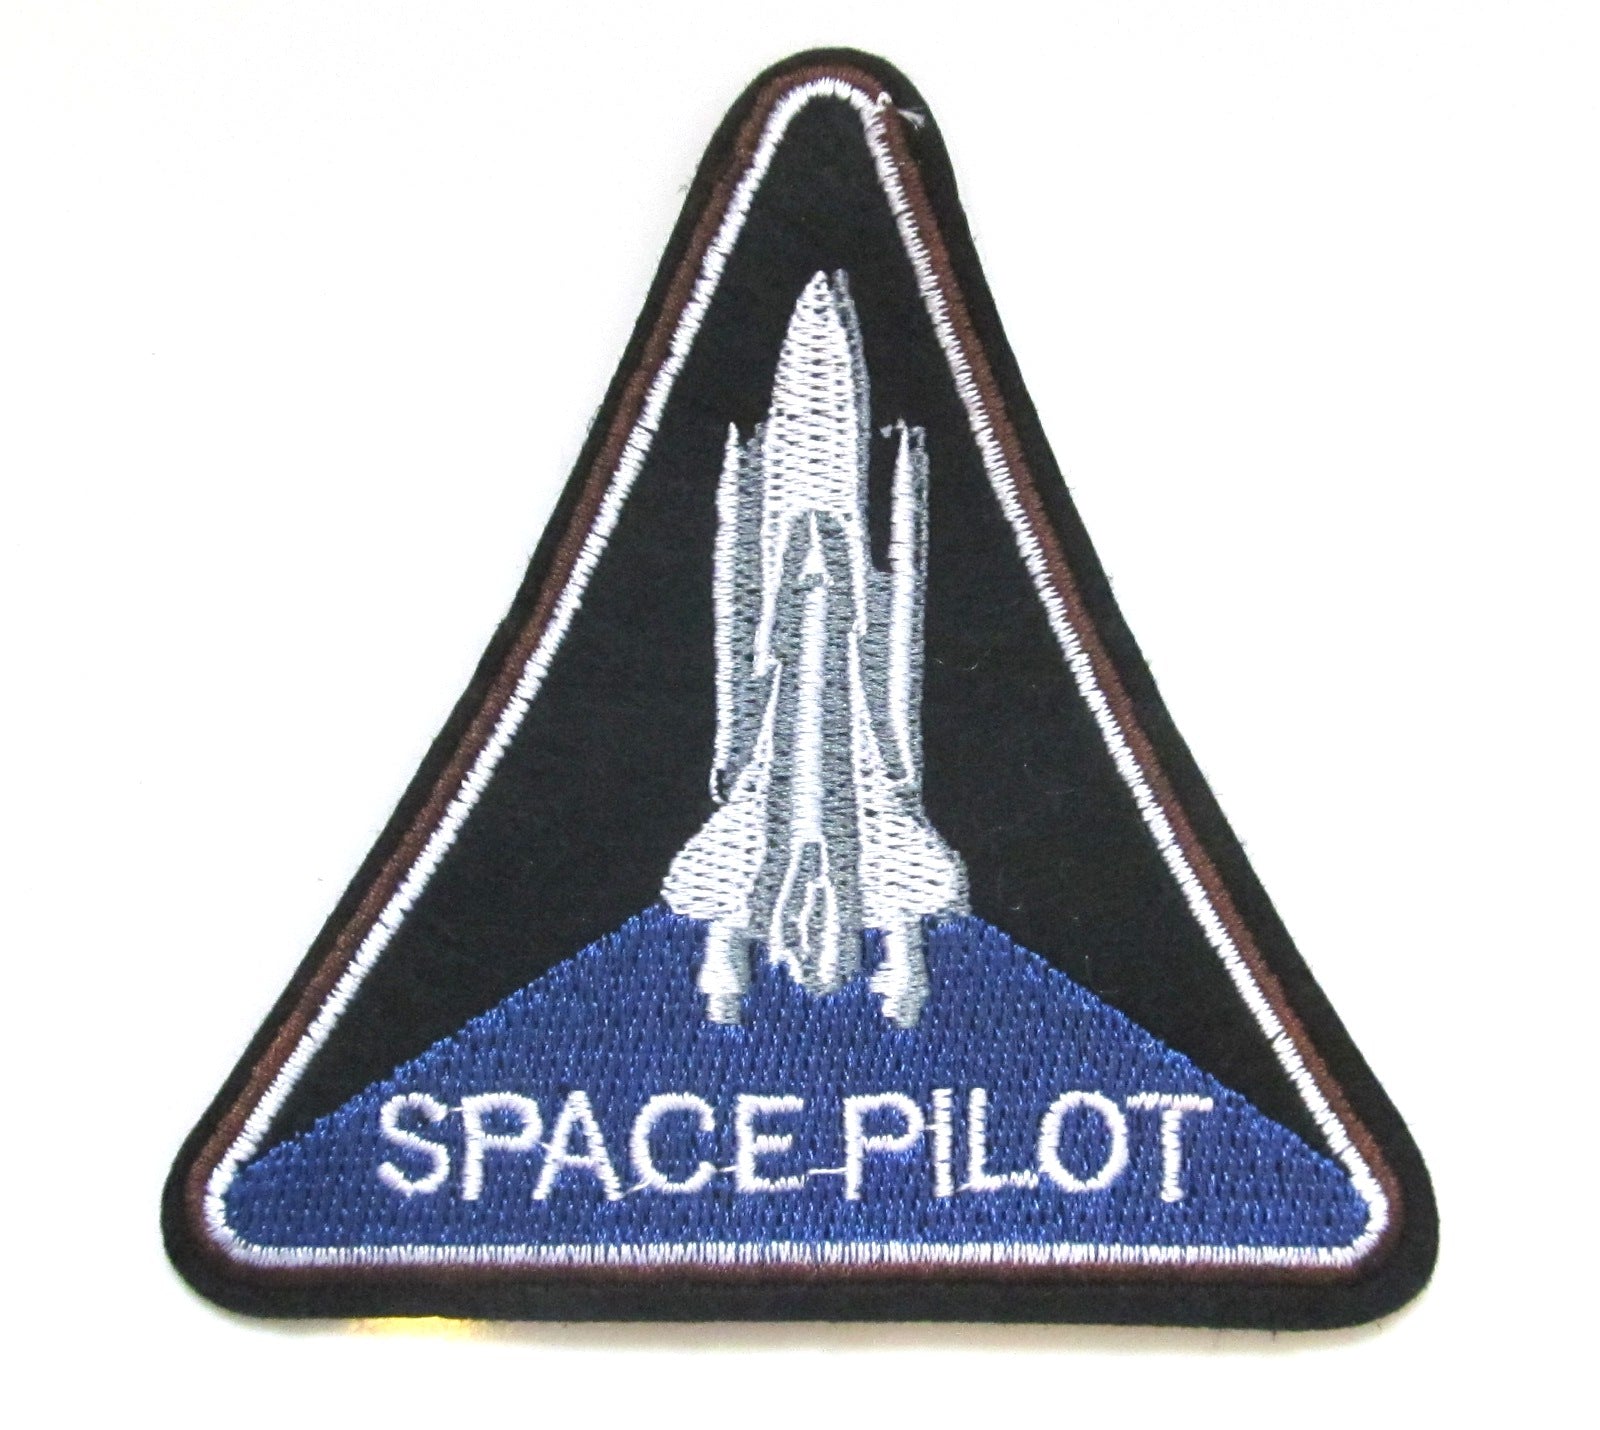 2pcs Iron on Patches for Clothing – Astronaut Skateboarding Theme  Embroidered Iron on Patches for Clothes, Backpacks, Jeans, Shirt, Jacket,  Dress